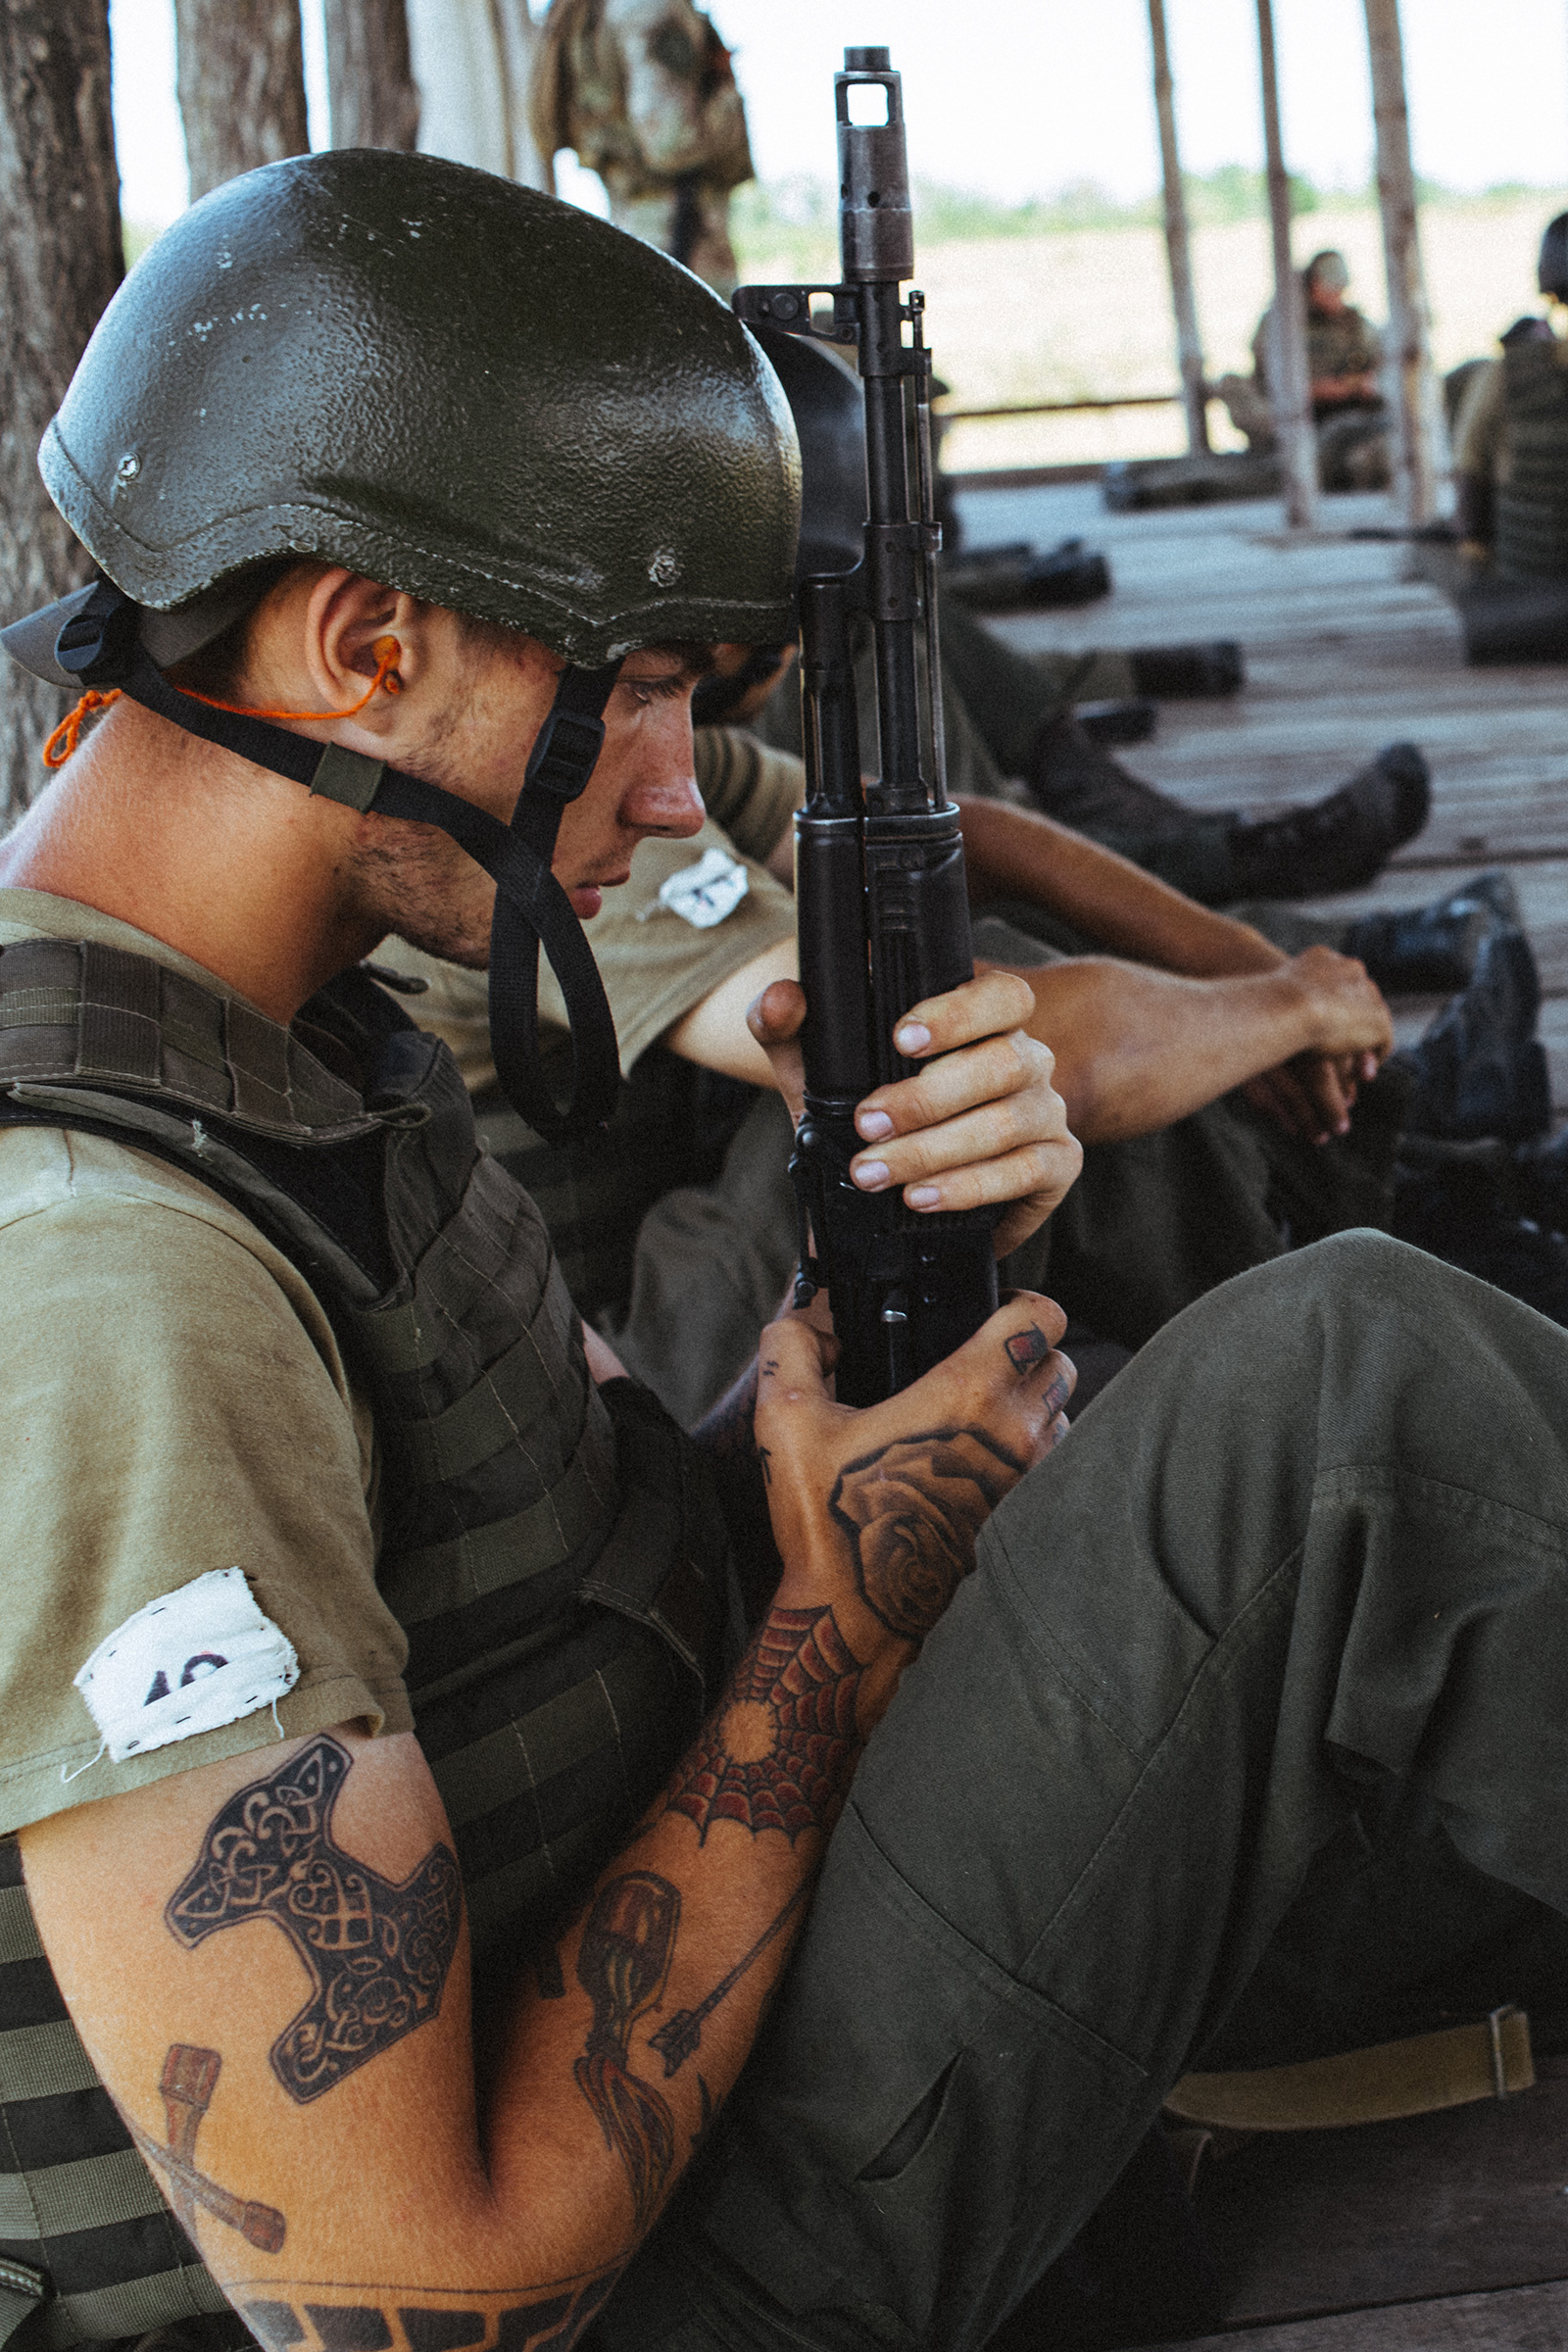 A young Azov recruit holds his rifle during basic training. His tattoos feature symbols often used by right-wing radicals around the world, including the Black Sun and Thor's Hammer.